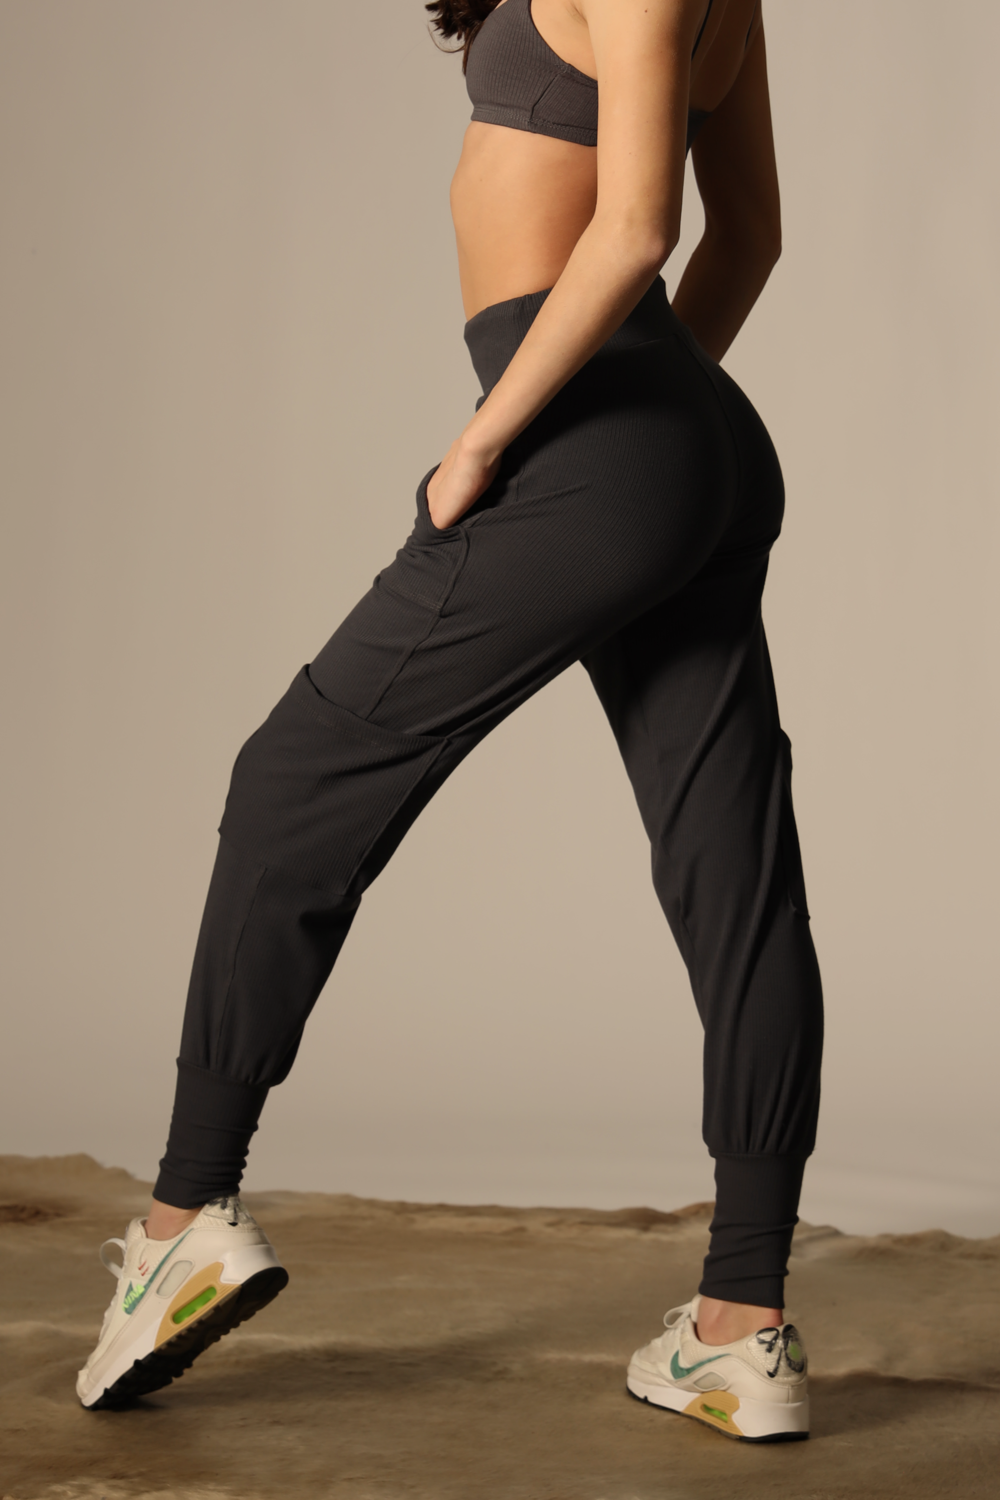 TALL GIRL APPROVED PANTS!!!, Gallery posted by gracyn